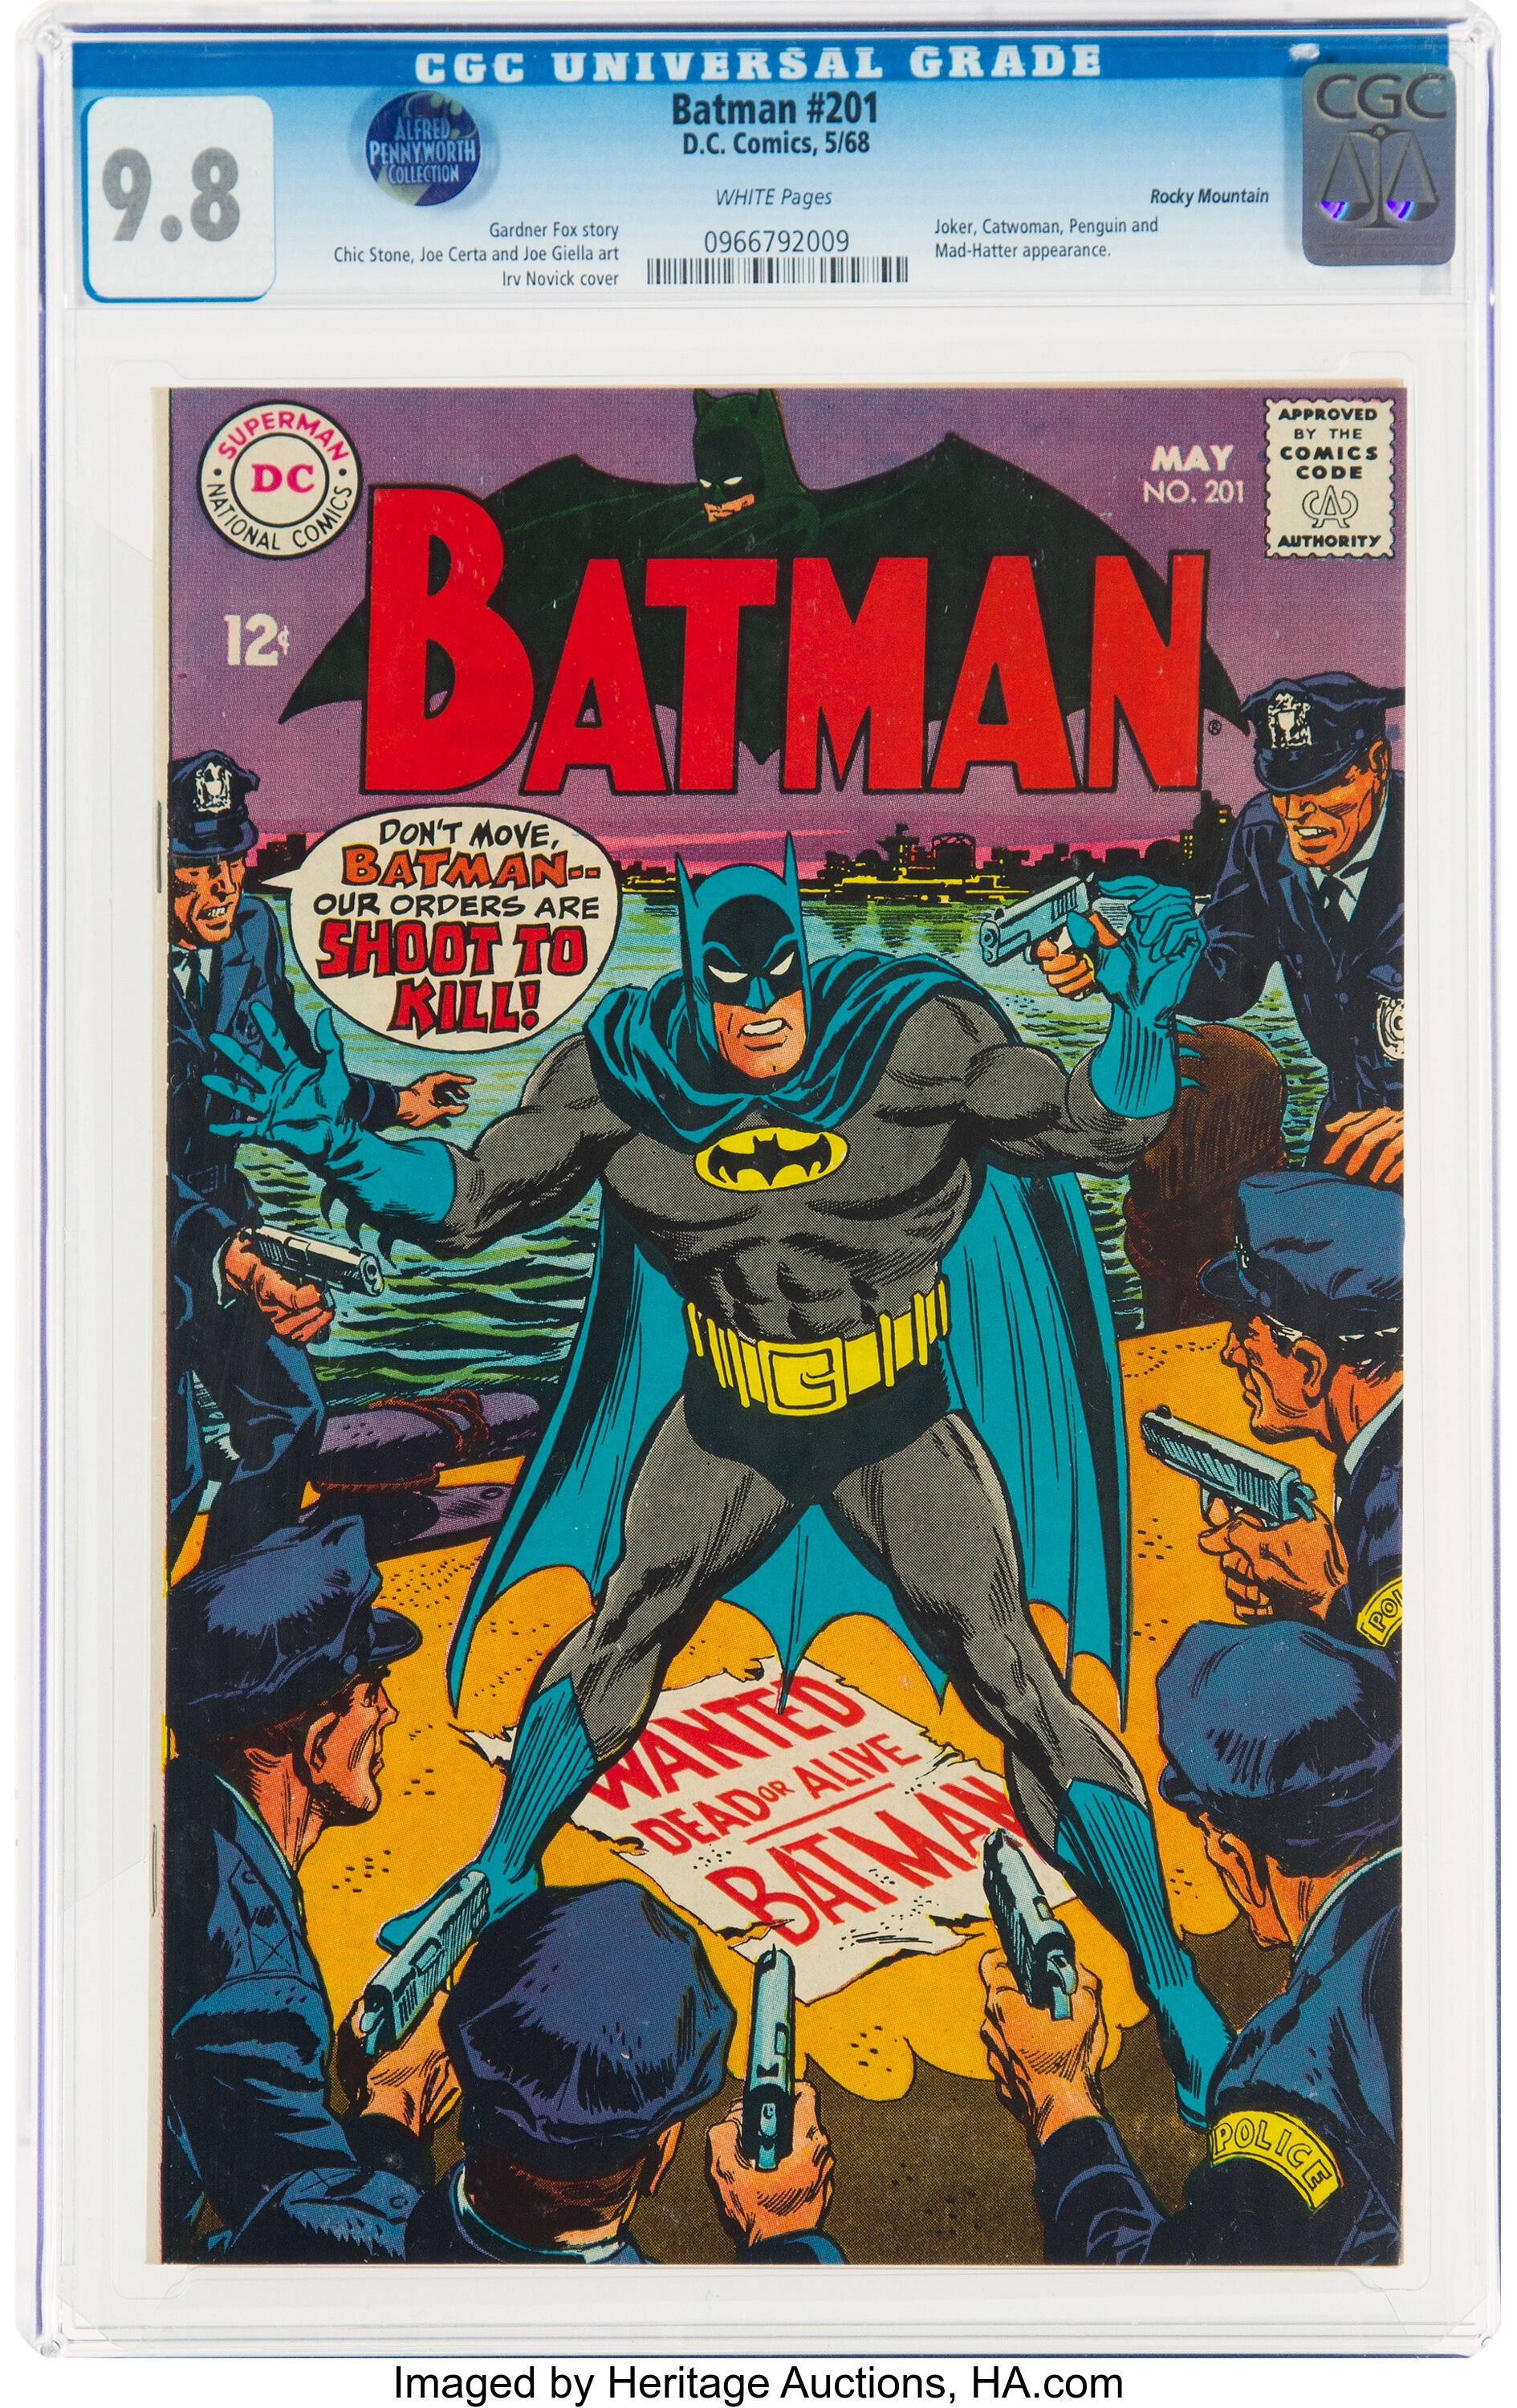 How Much Is Batman #201 Worth? Browse Comic Prices | Heritage Auctions